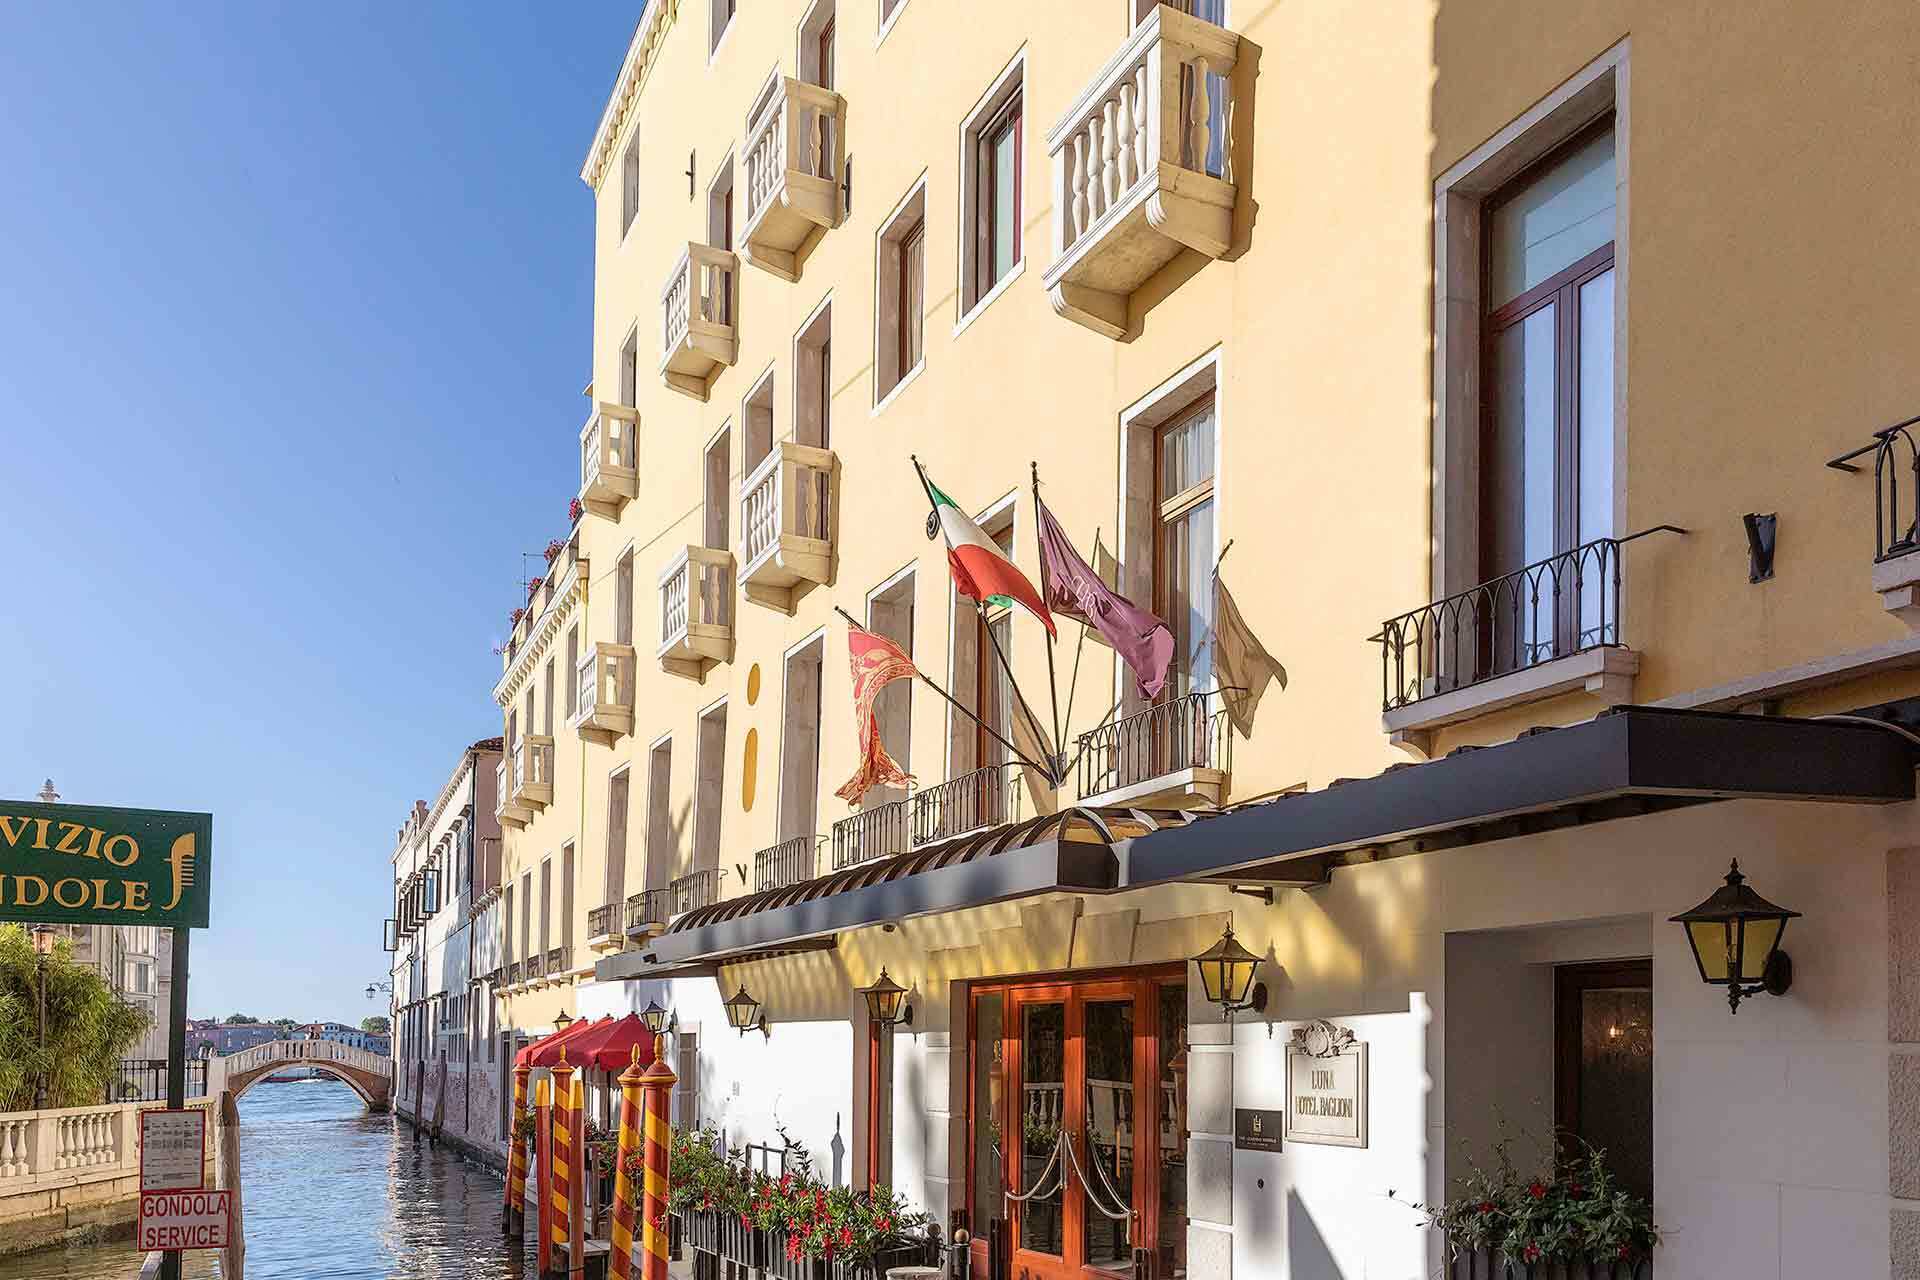 Best hotels in Venice: 10 charming locations in the elegant city on the water